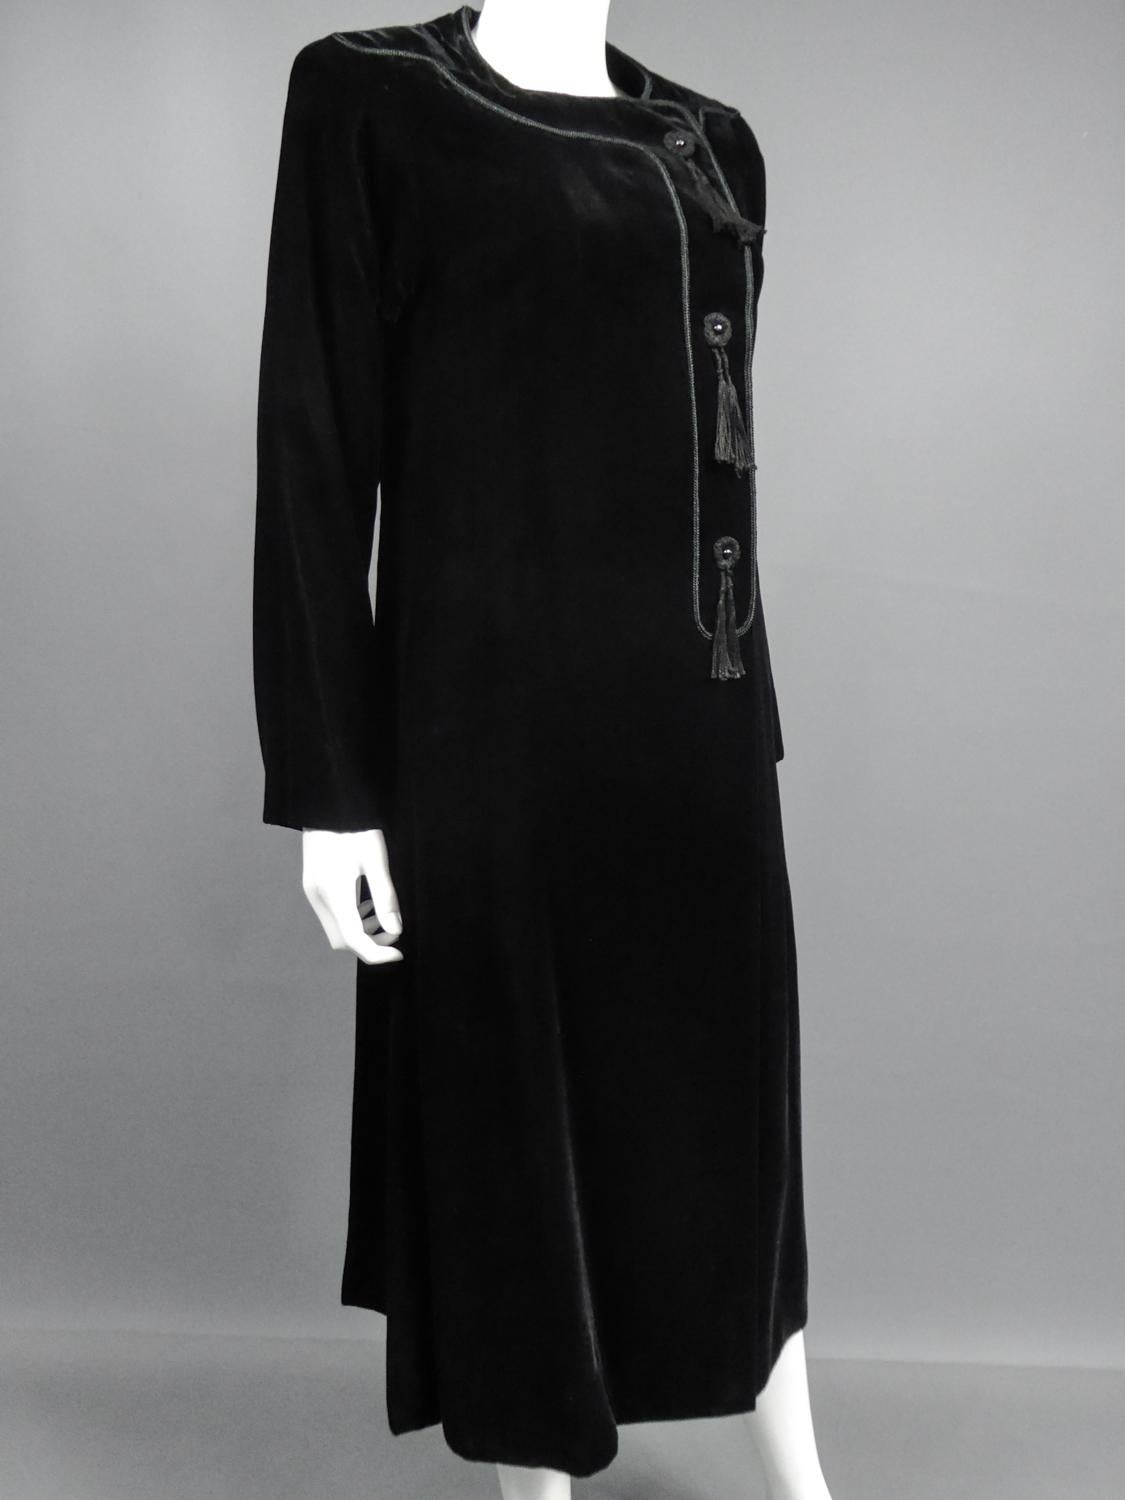 A french Couture Emanuel Ungaro Little Black Dress Number 4383-10-76 Circa 1976 For Sale 6